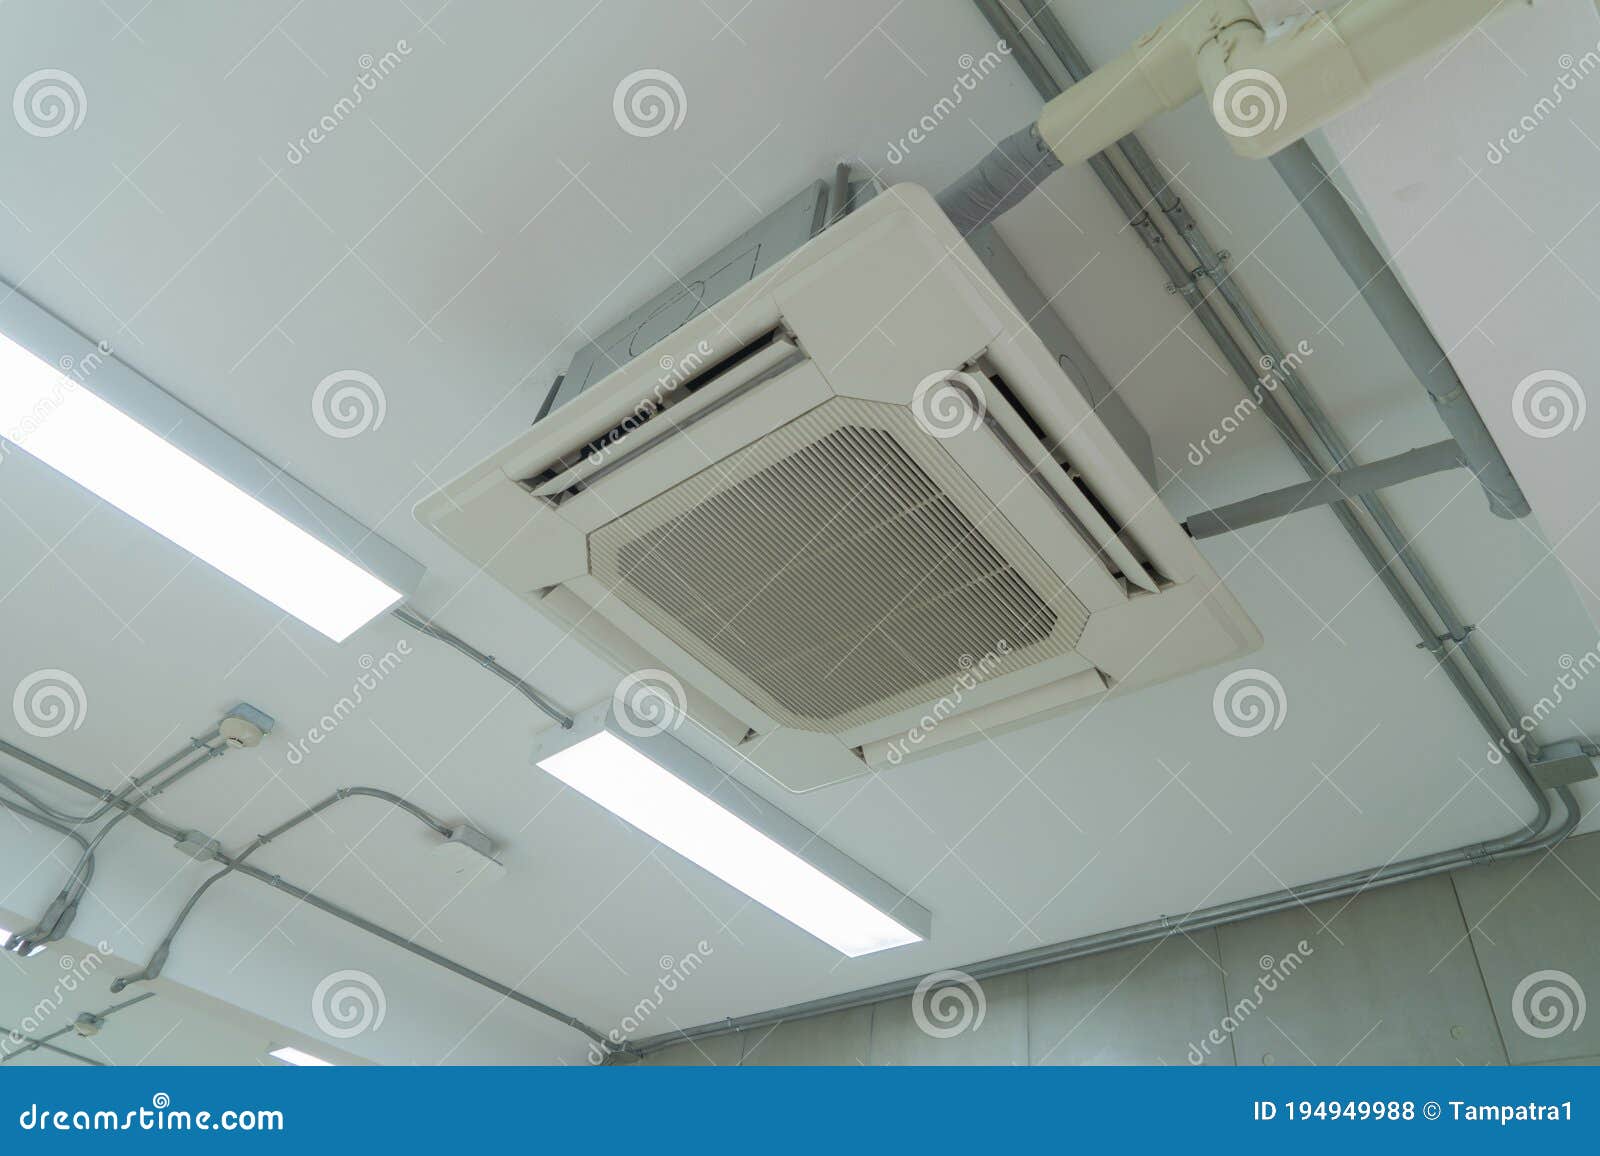 Modern White Ceiling Mounted Cassette Type Air Conditioner In Office Building System Work Ventilation Compressor Stock Photo Image Of Compressor Cool 194949988